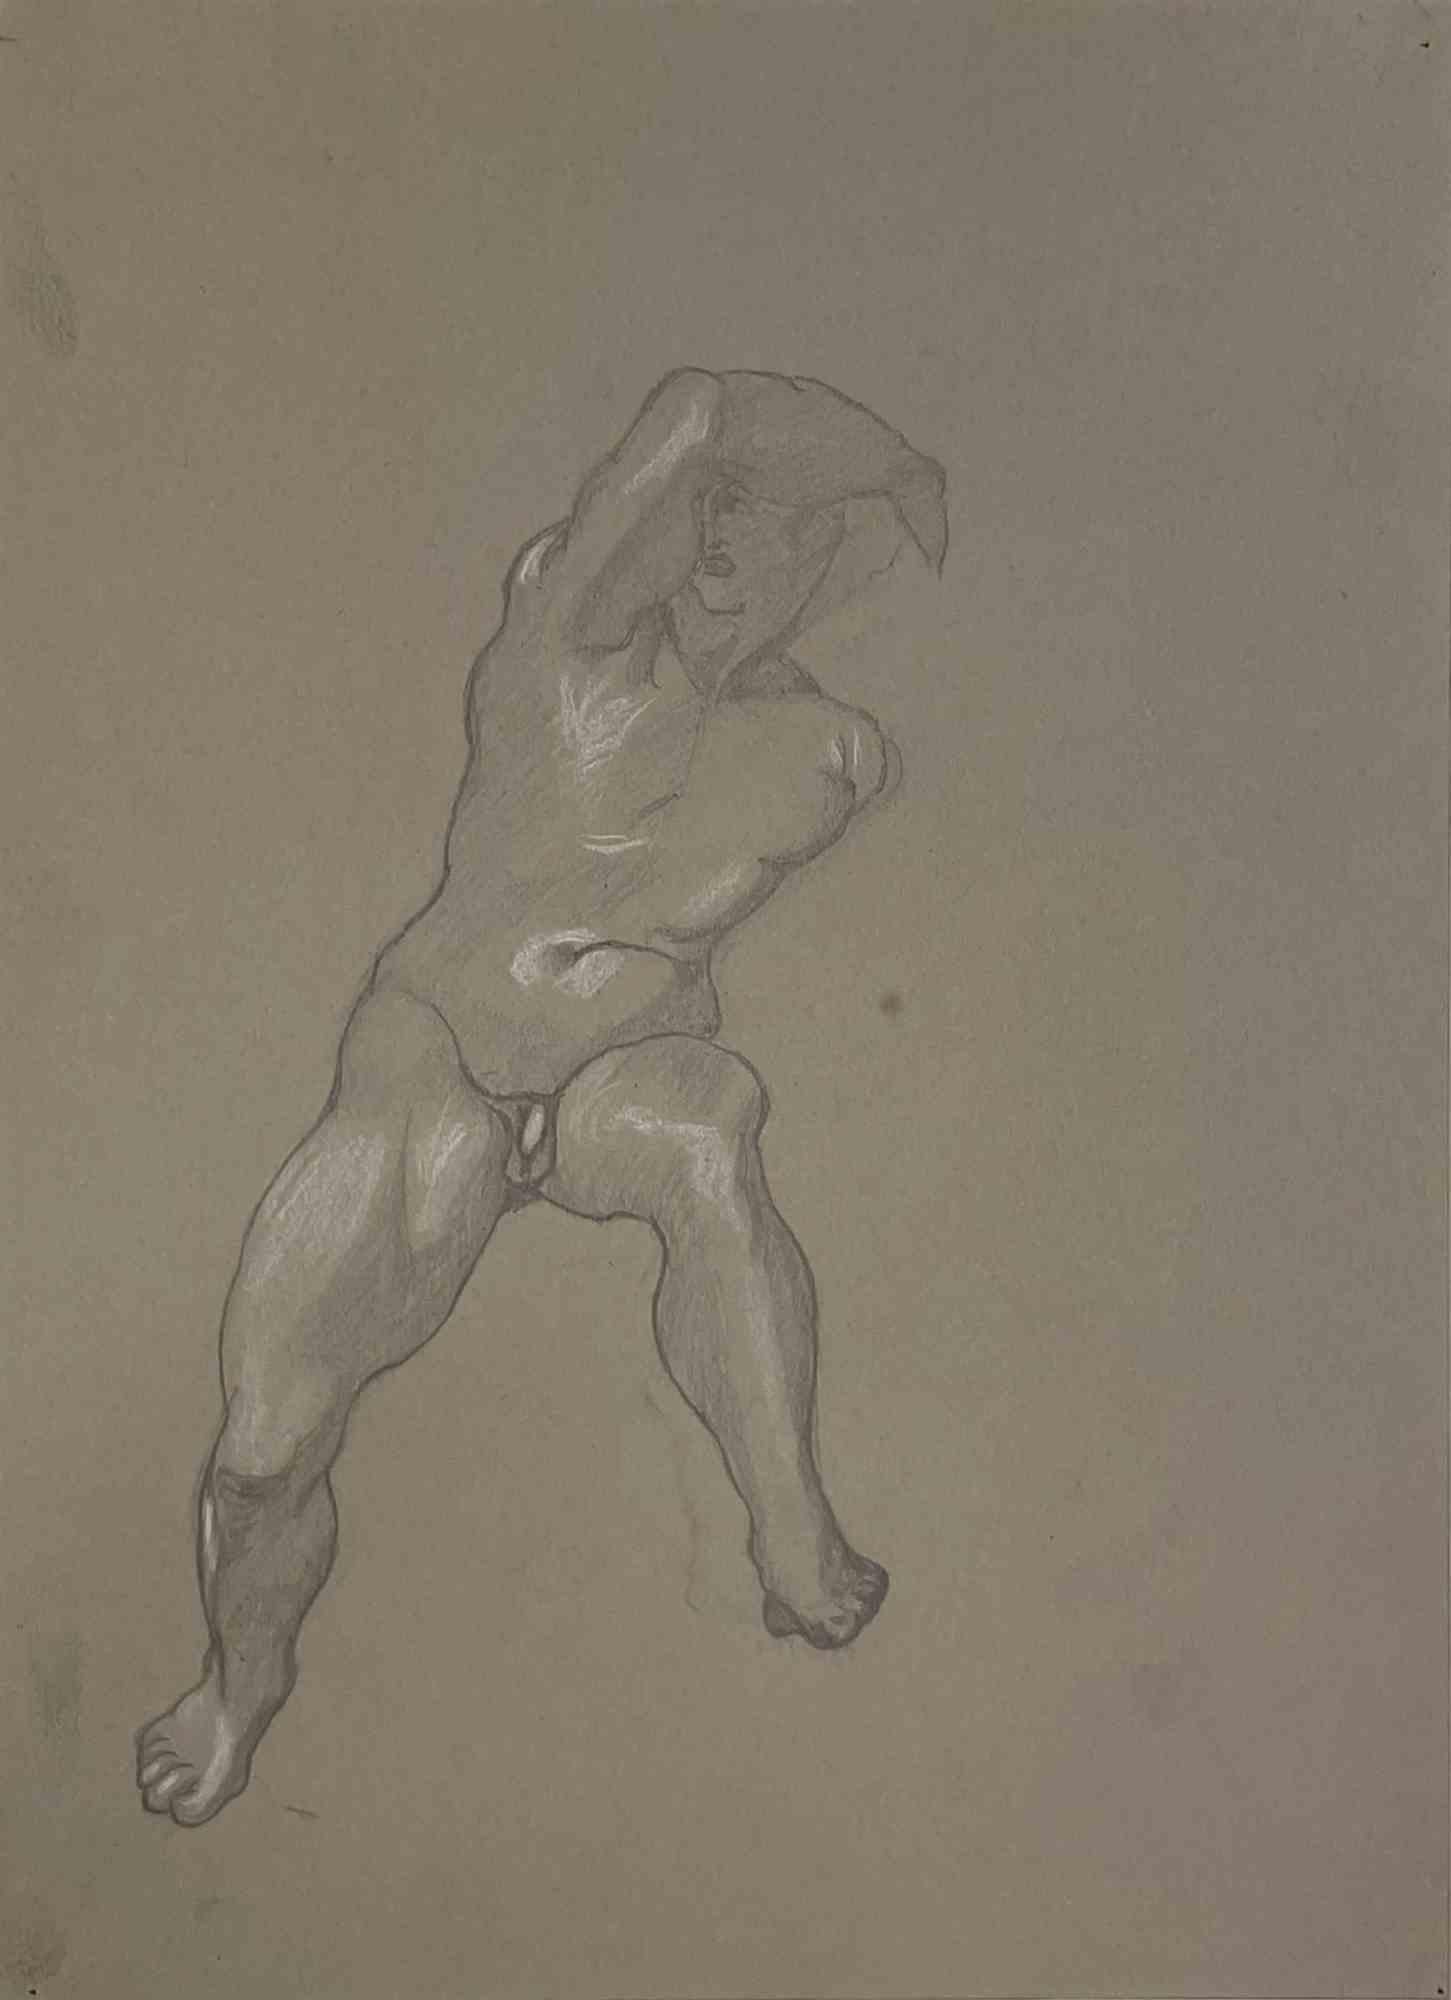 Nude after Michelangelo - Mixed Media by Luigi Russolo - 1933/34